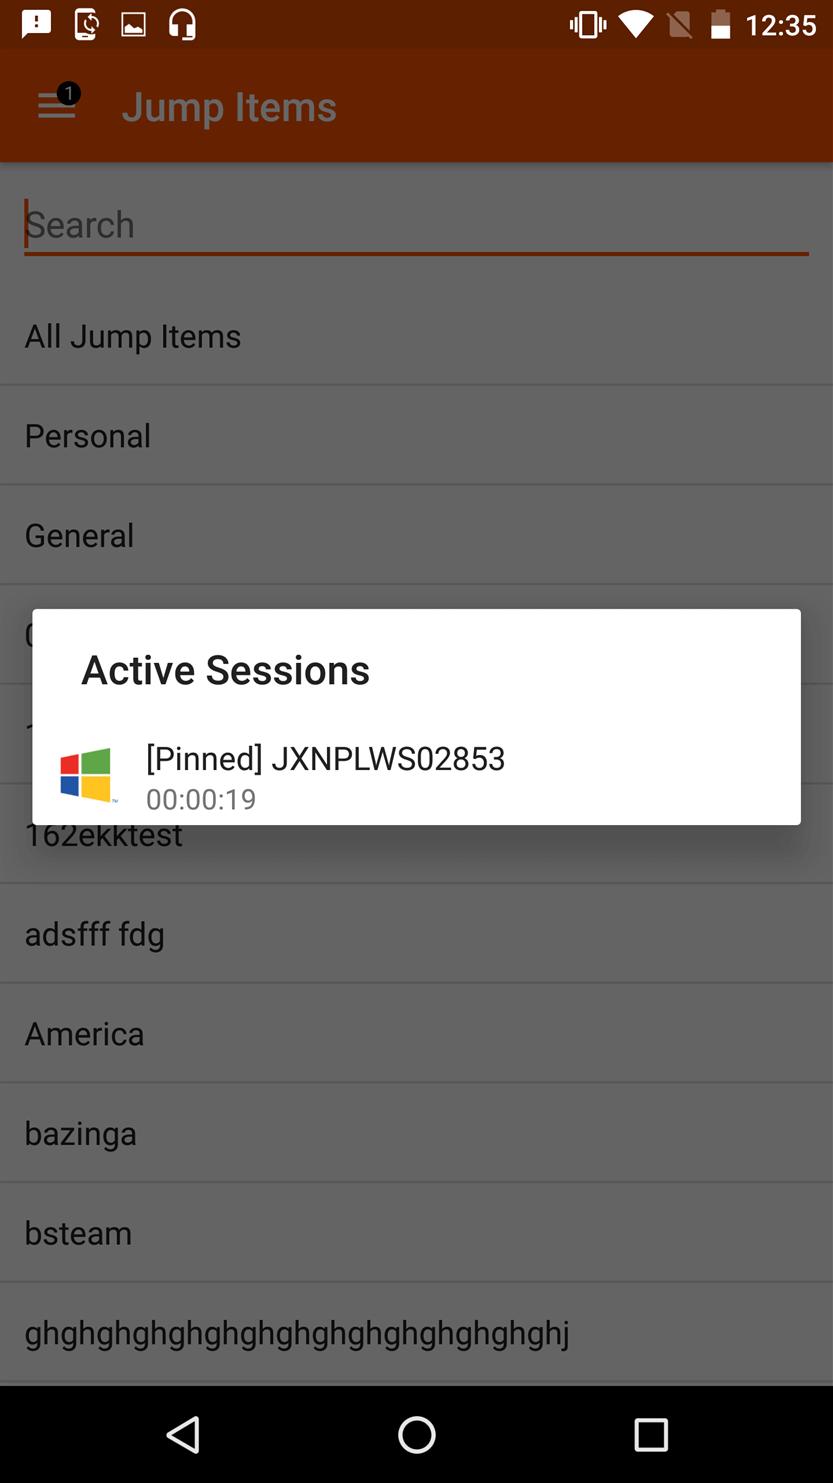 Tap the active session you wish to return